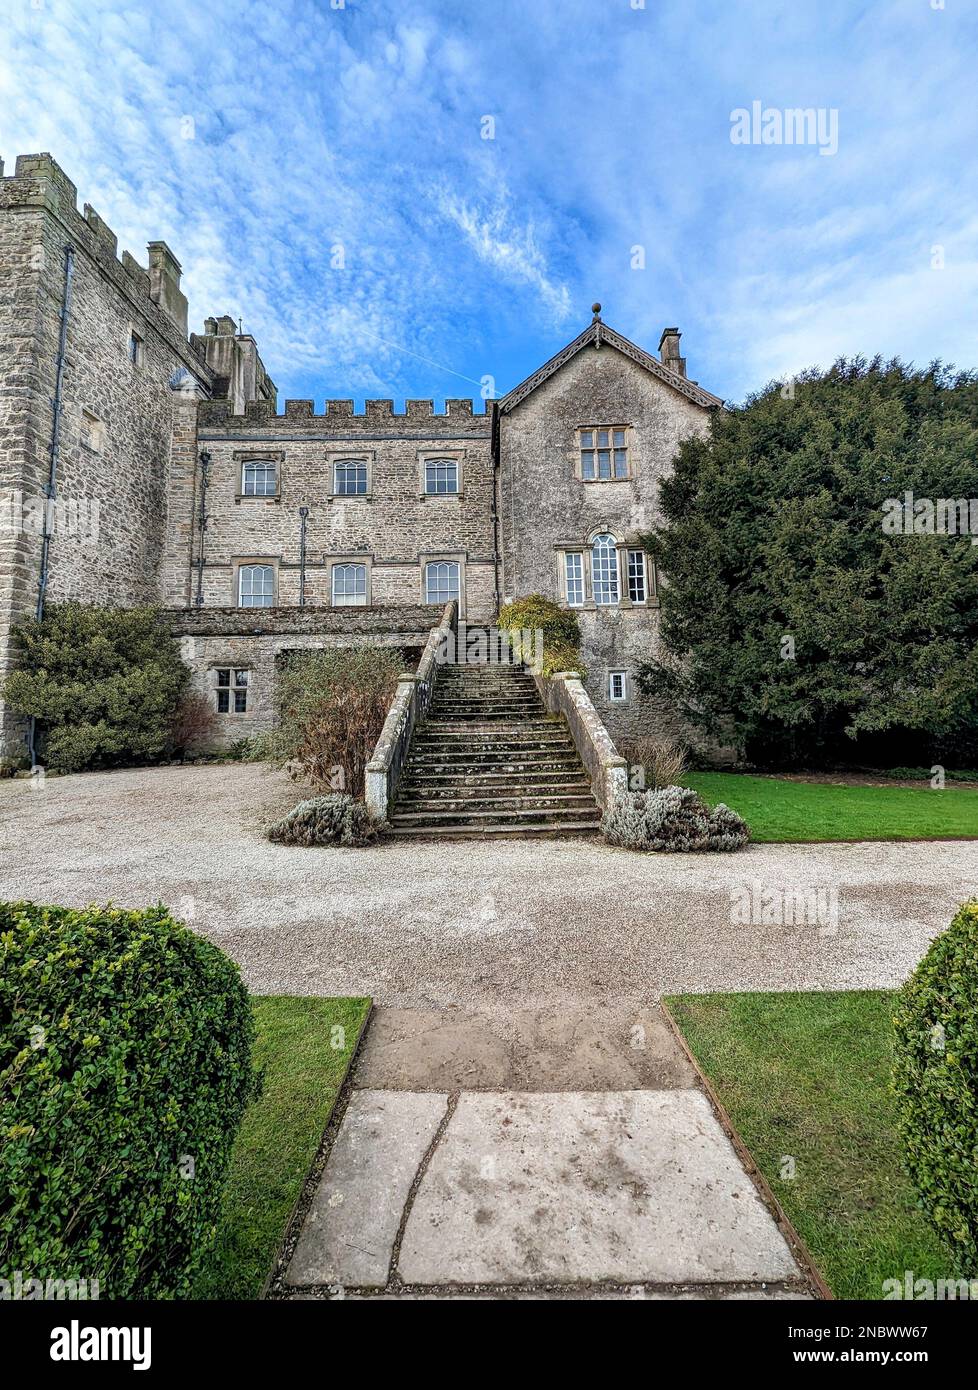 An old castle-like structure with a set of stone steps leading up to the entrance Stock Photo